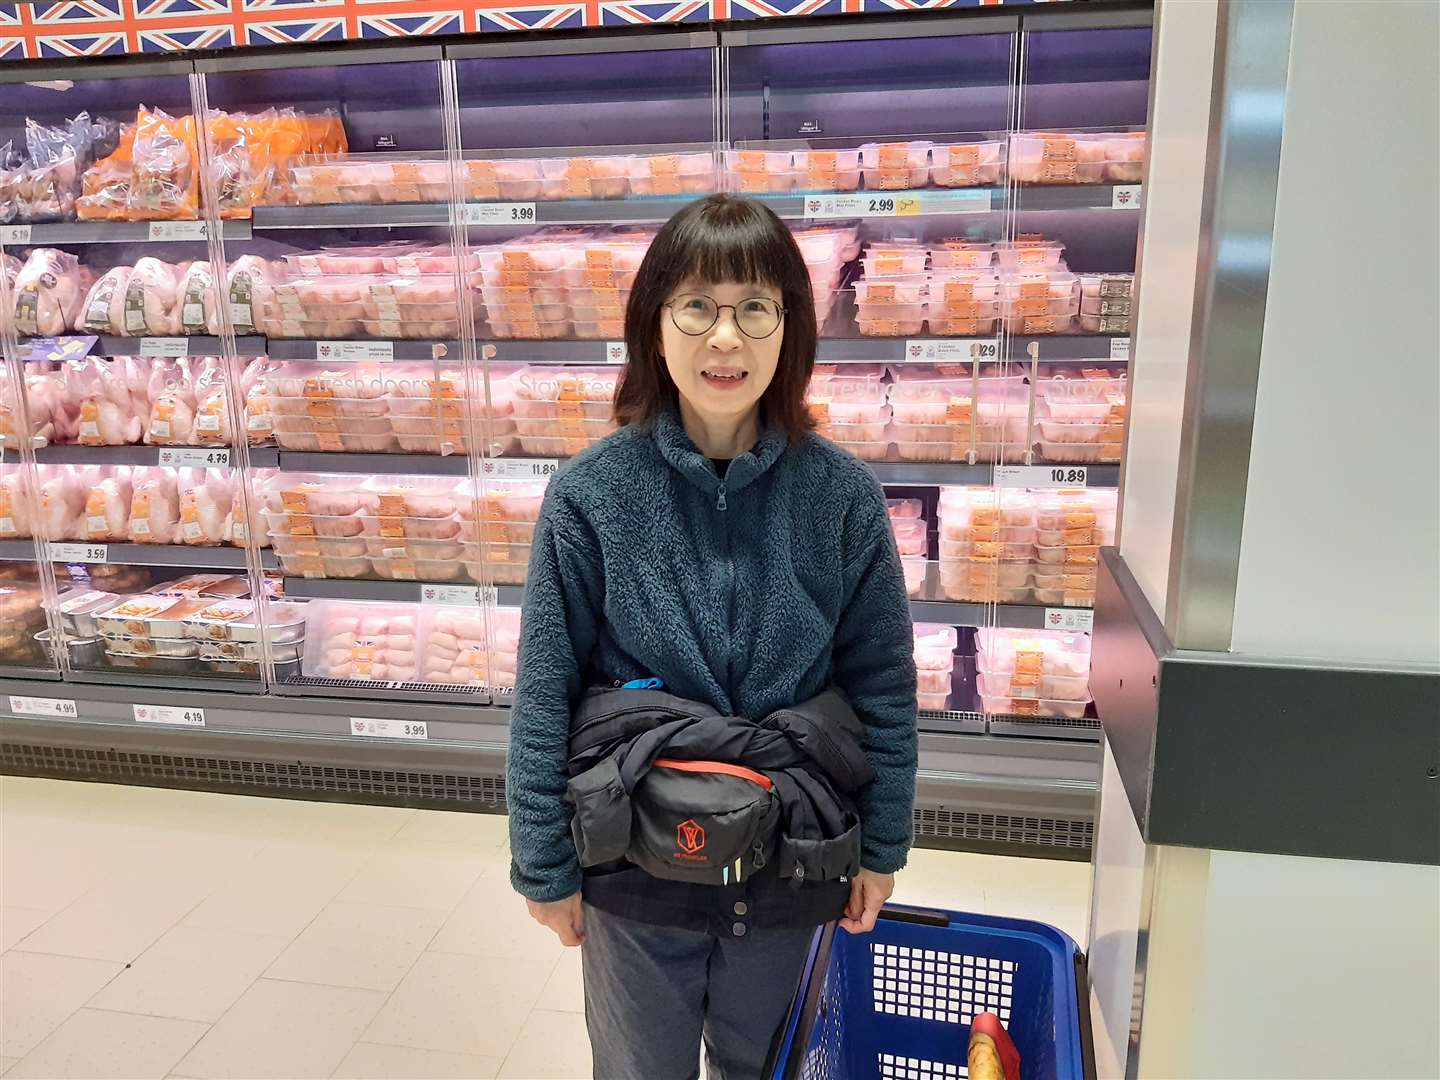 Lai Tse is happy getting food for her weekly shop